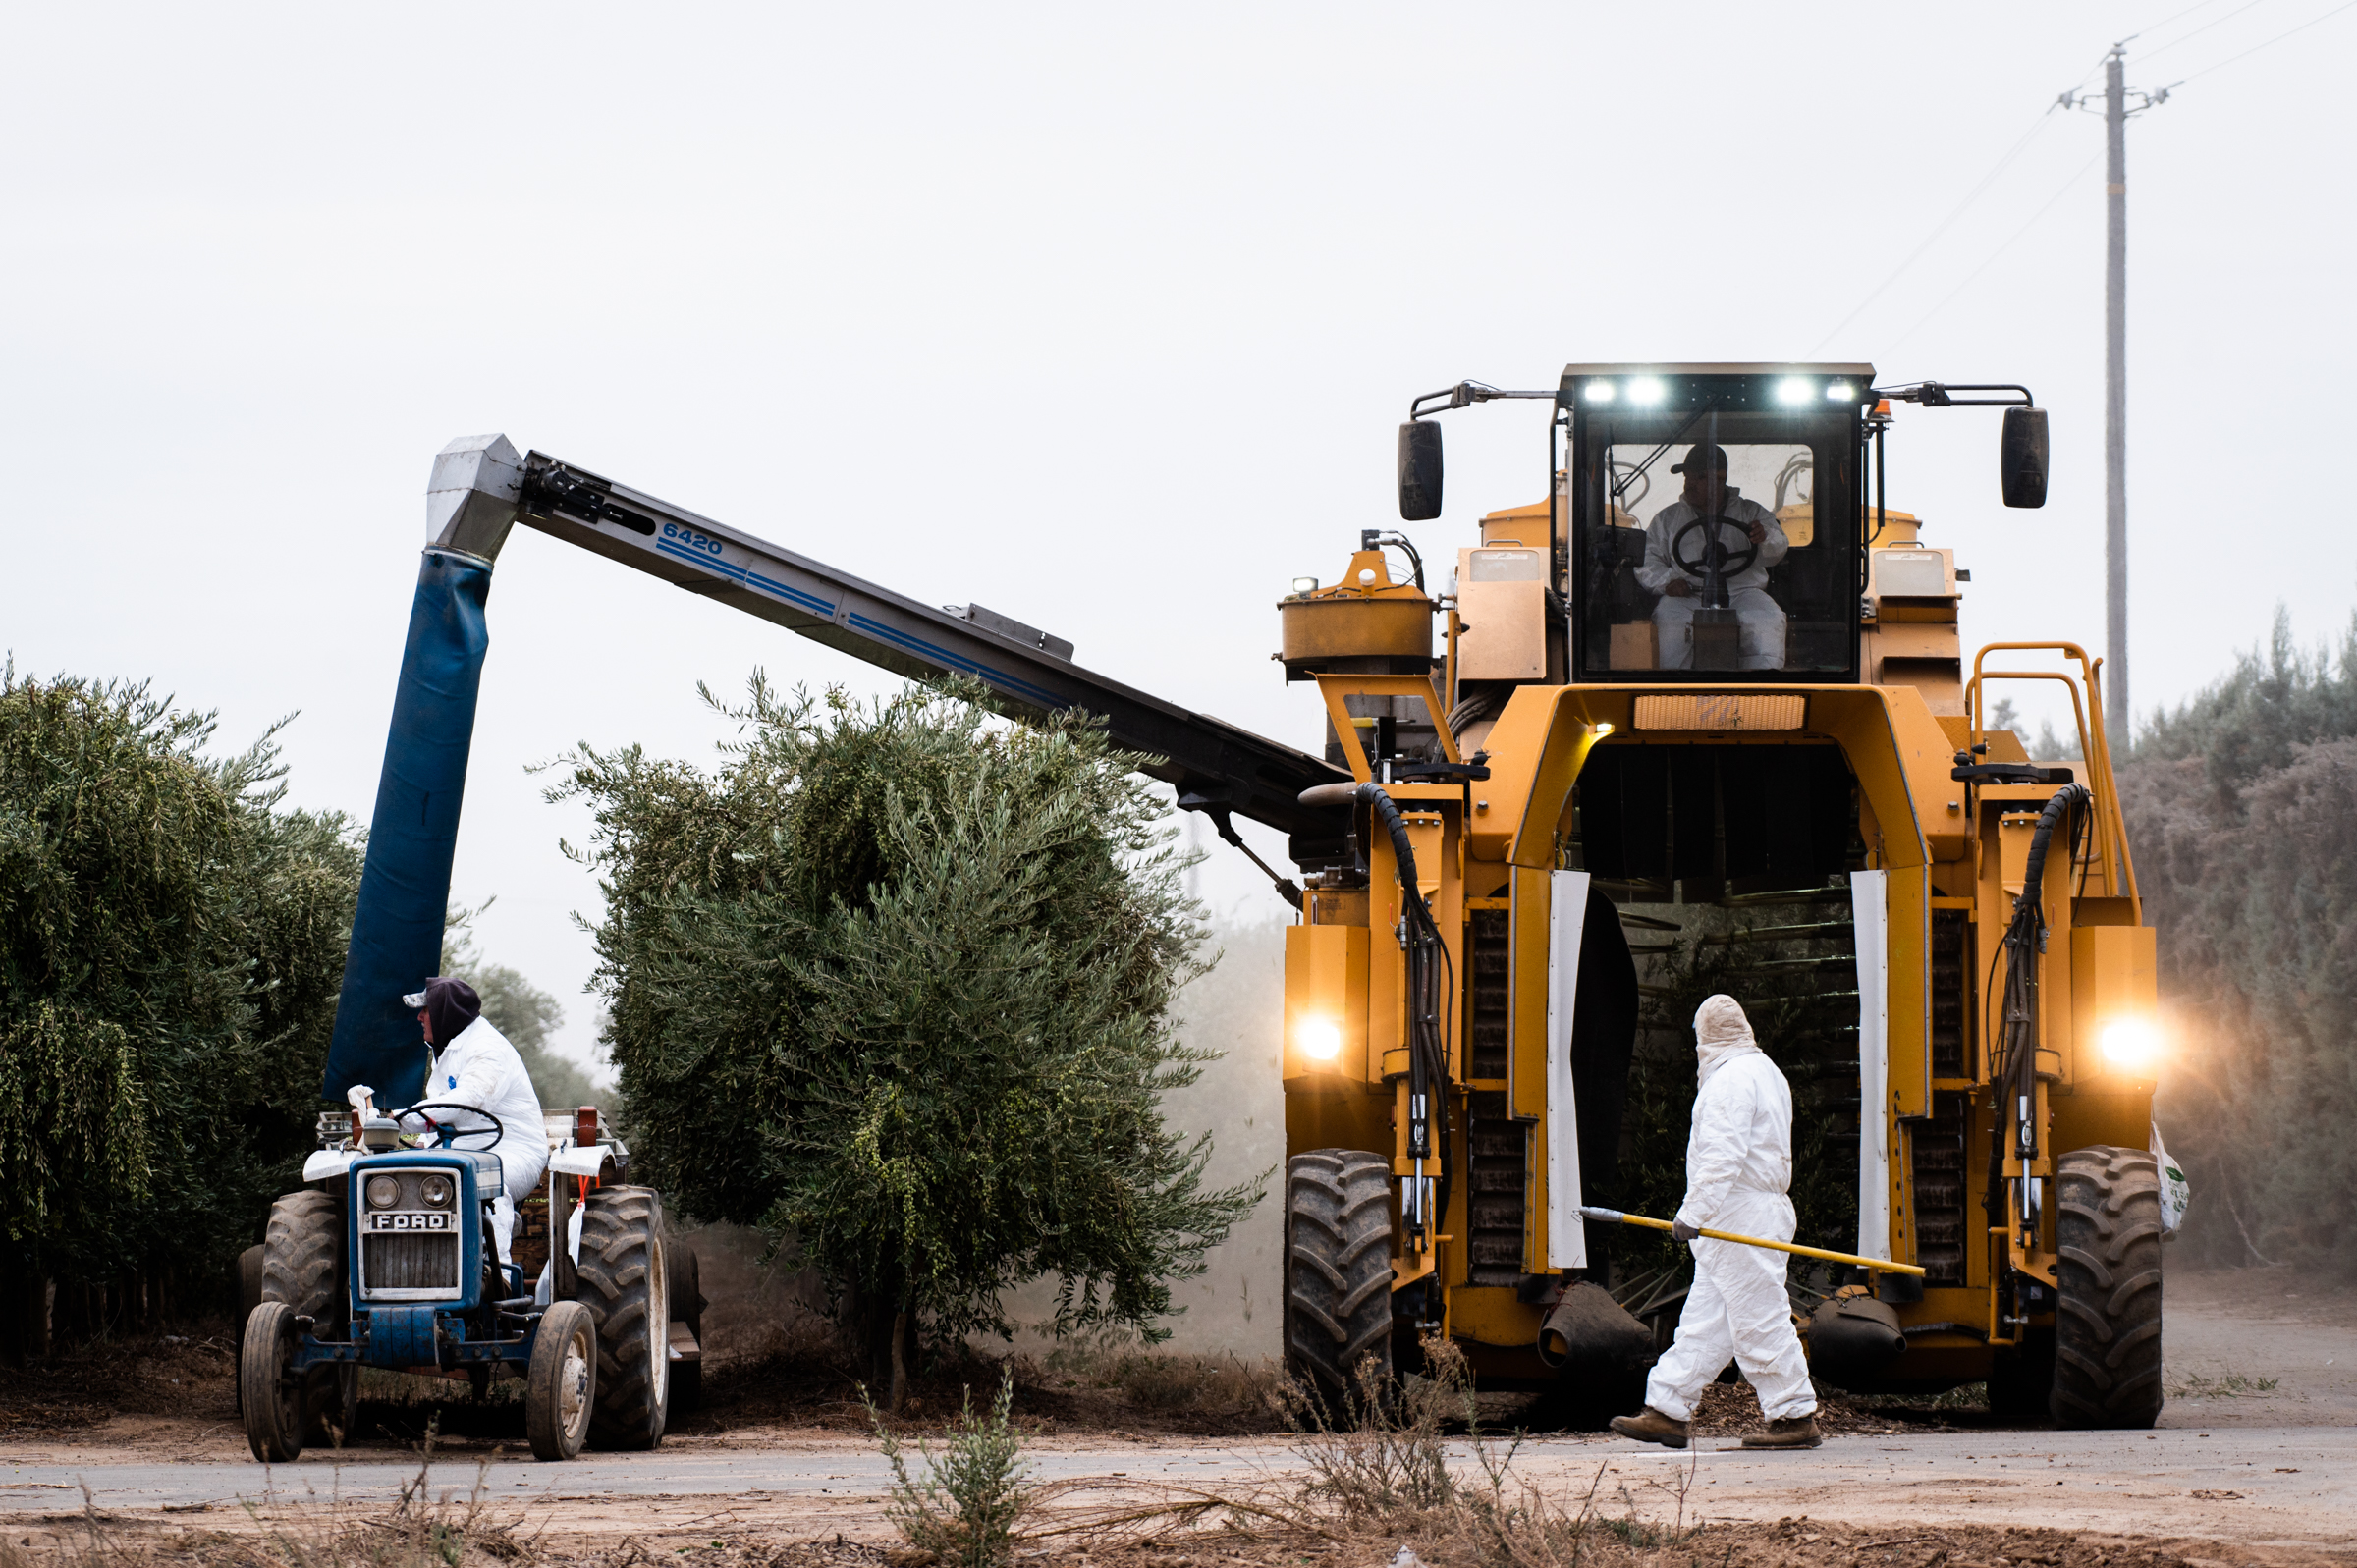 A crew member inspects a harvester as it passes over a row of olive trees